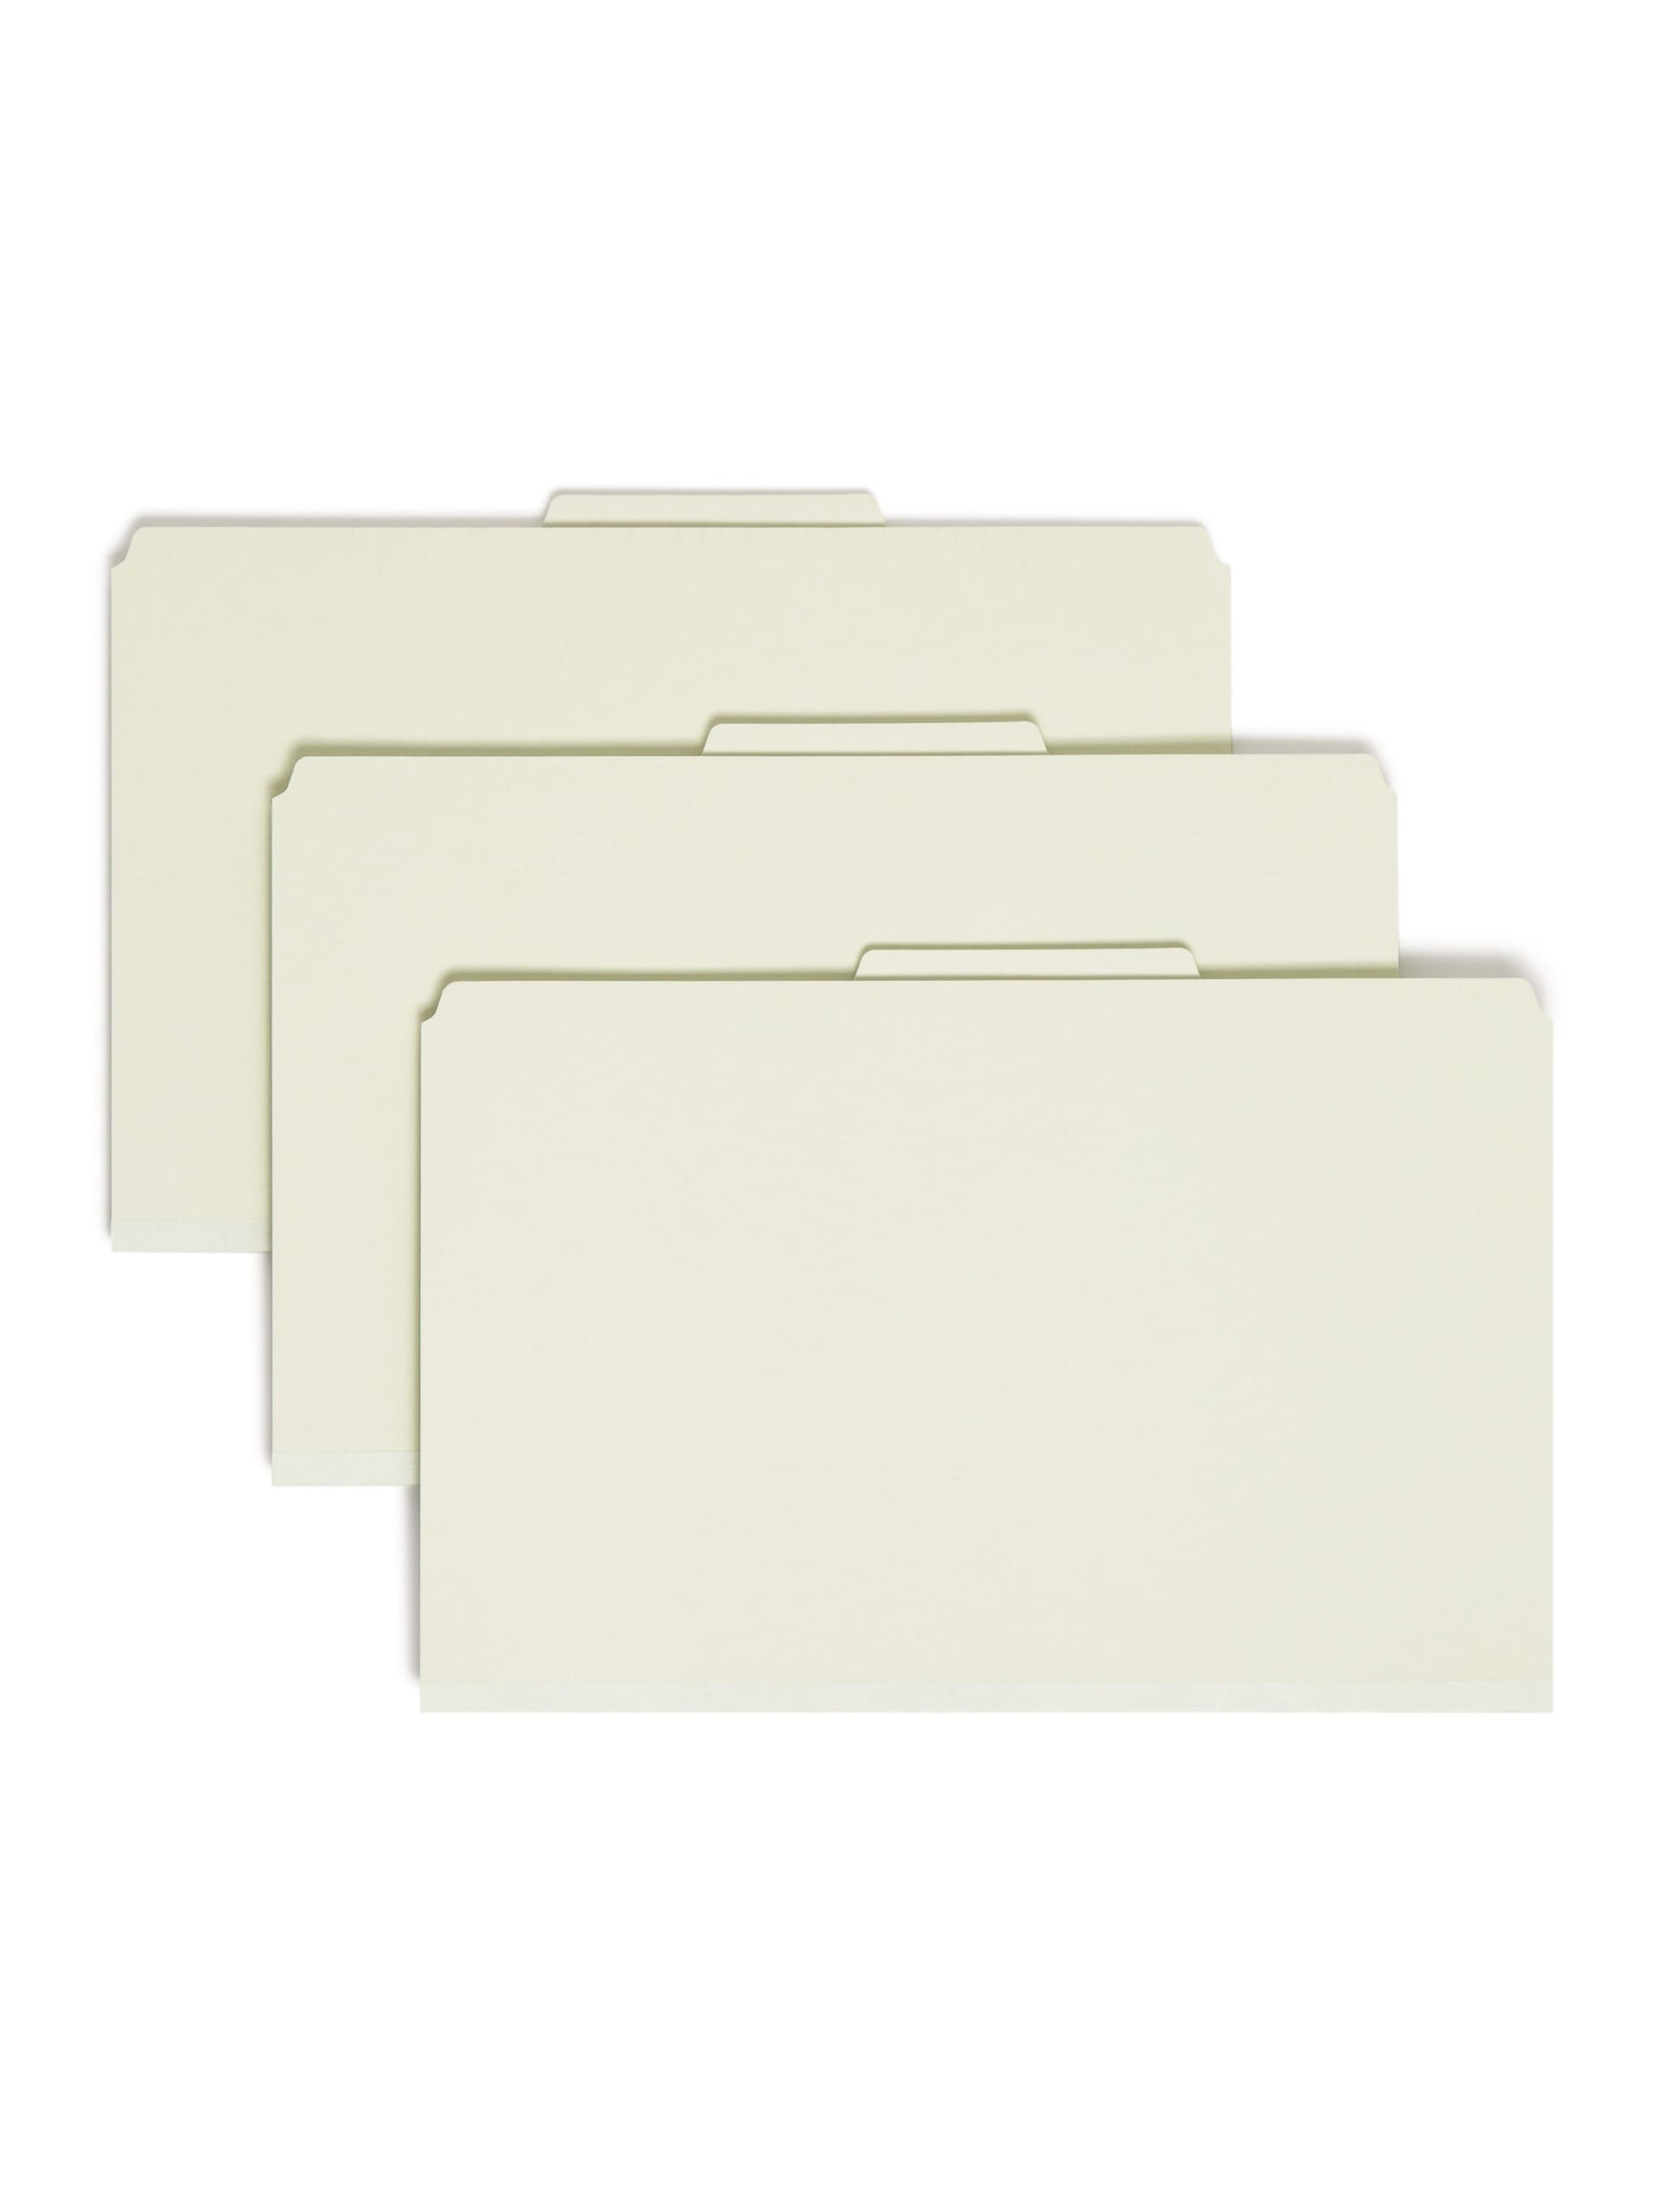 SafeSHIELD® Pressboard Classification File Folders, 3 Dividers, 3 inch Expansion, 2/5-Cut Tab, Gray/Green Color, Legal Size, Set of 0, 30086486190917